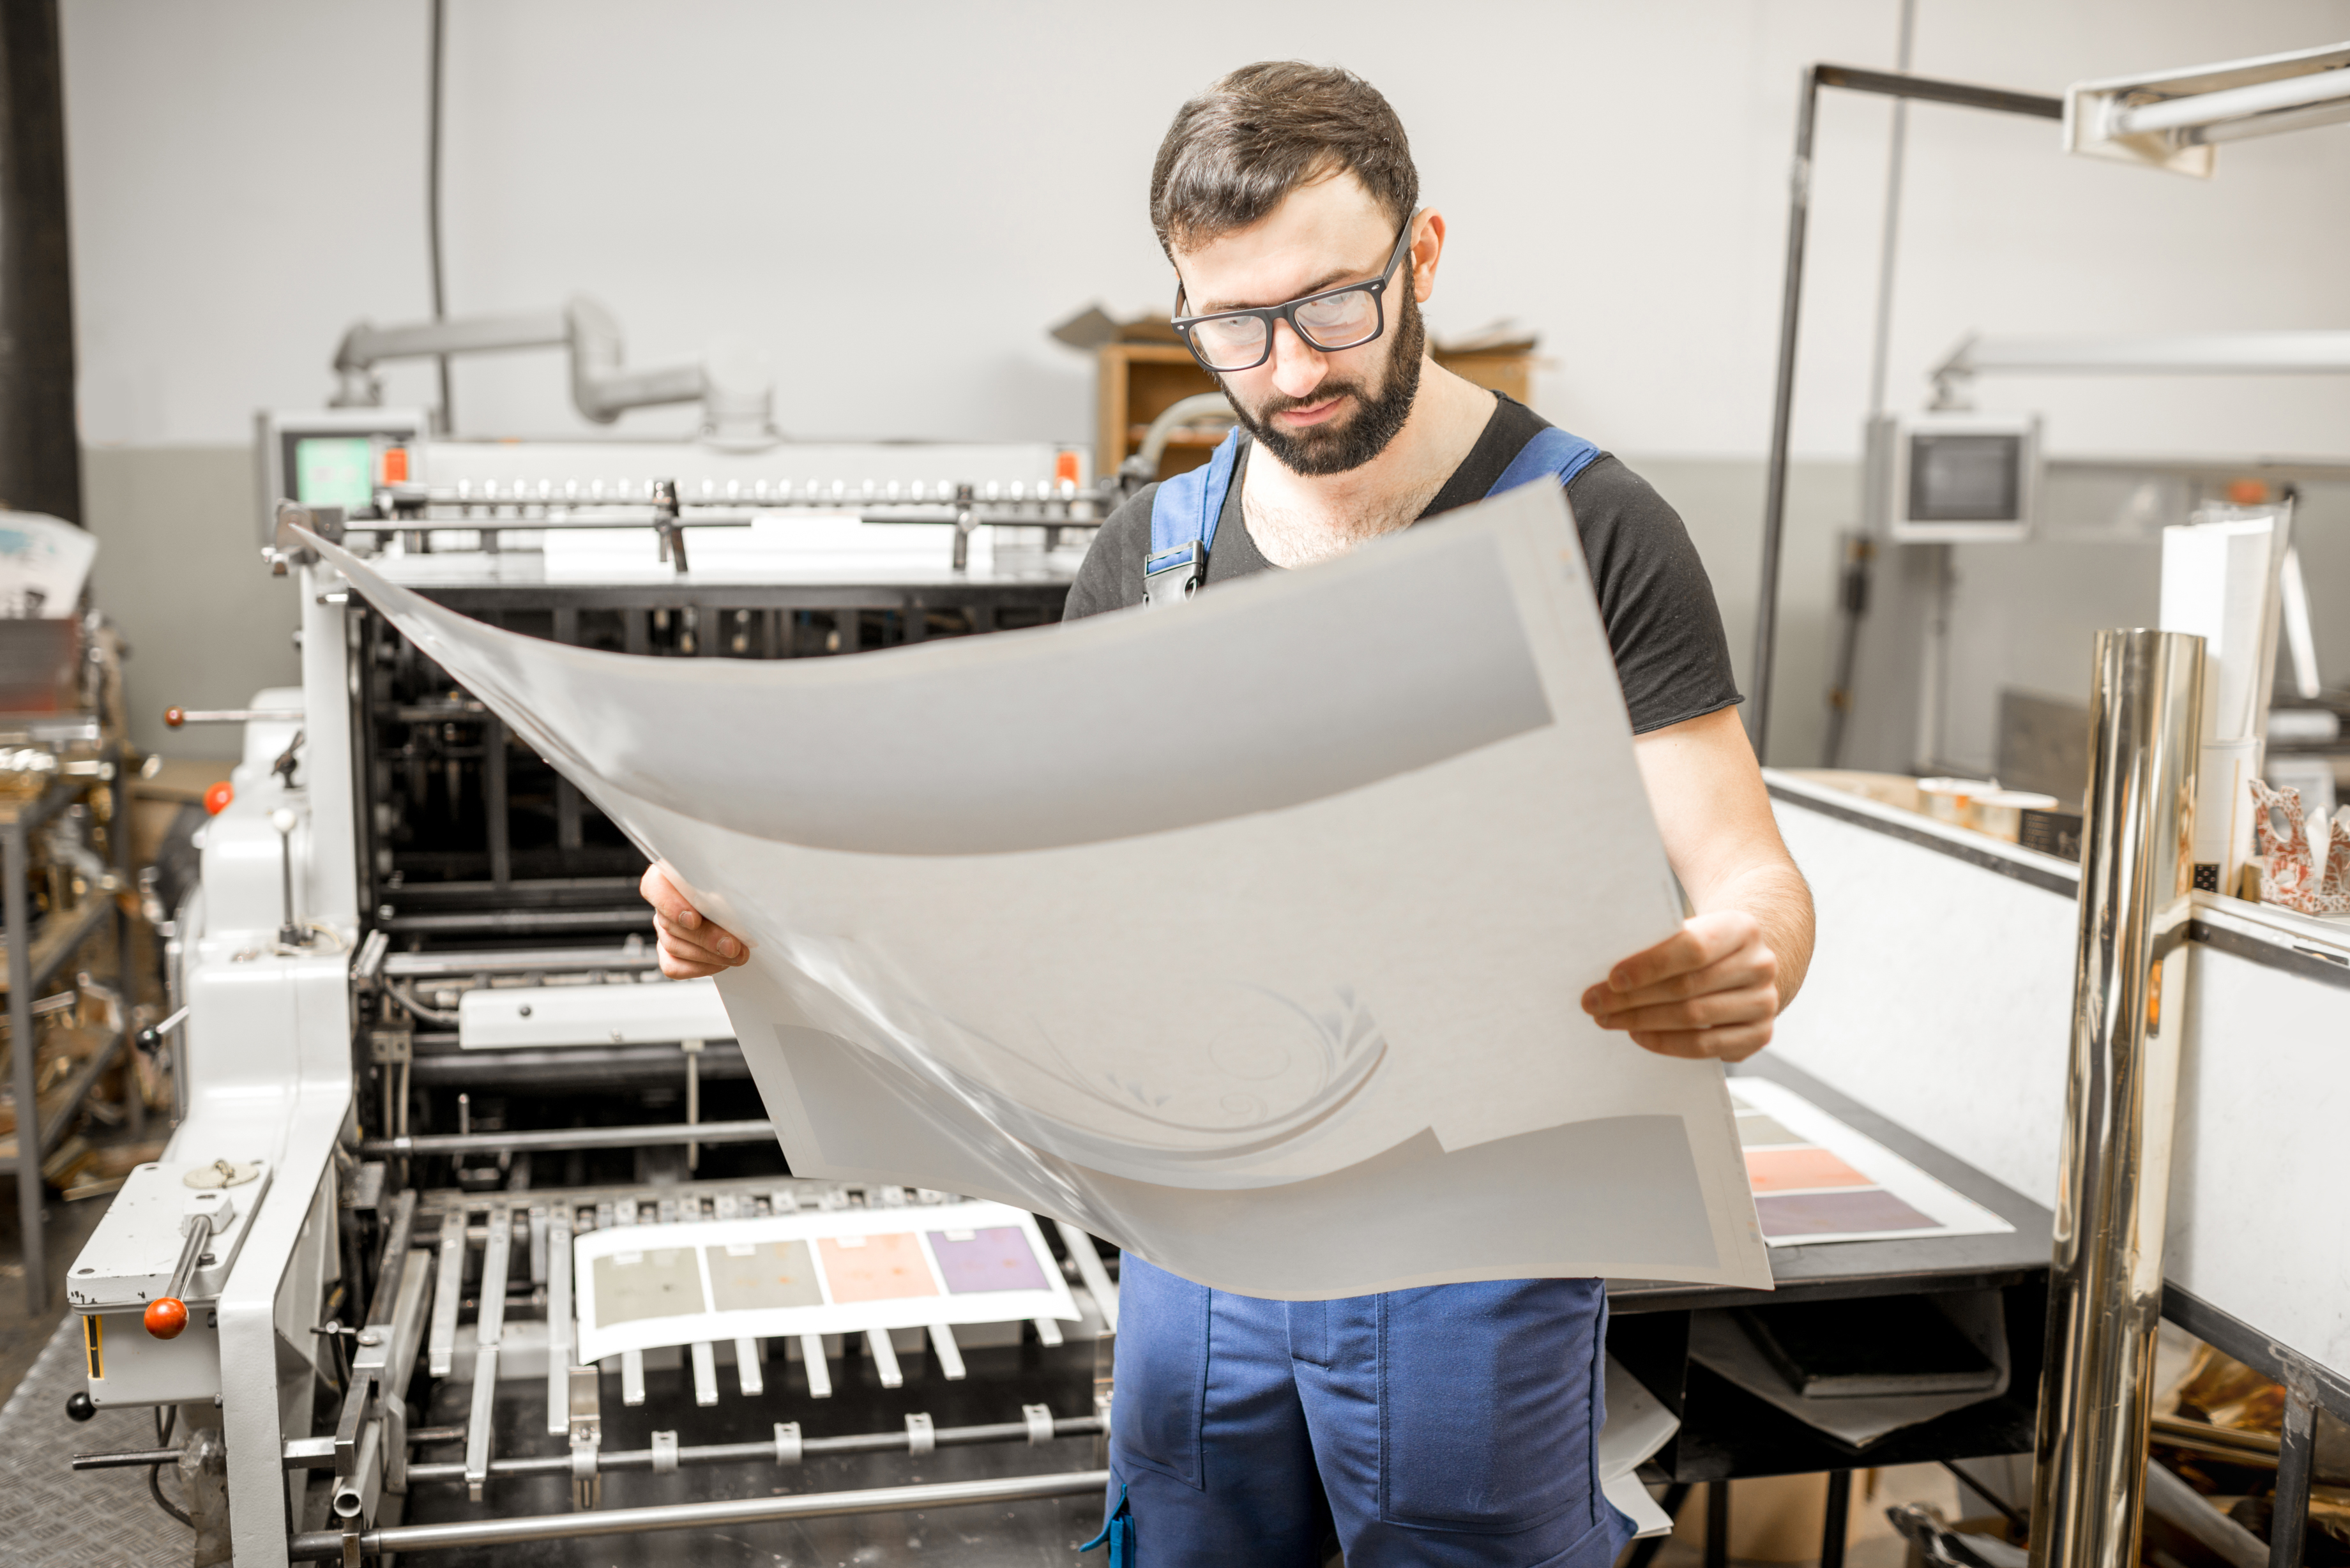 The Art of Printing: Turning Your Digital Artwork into Physical Prints with House of Toners